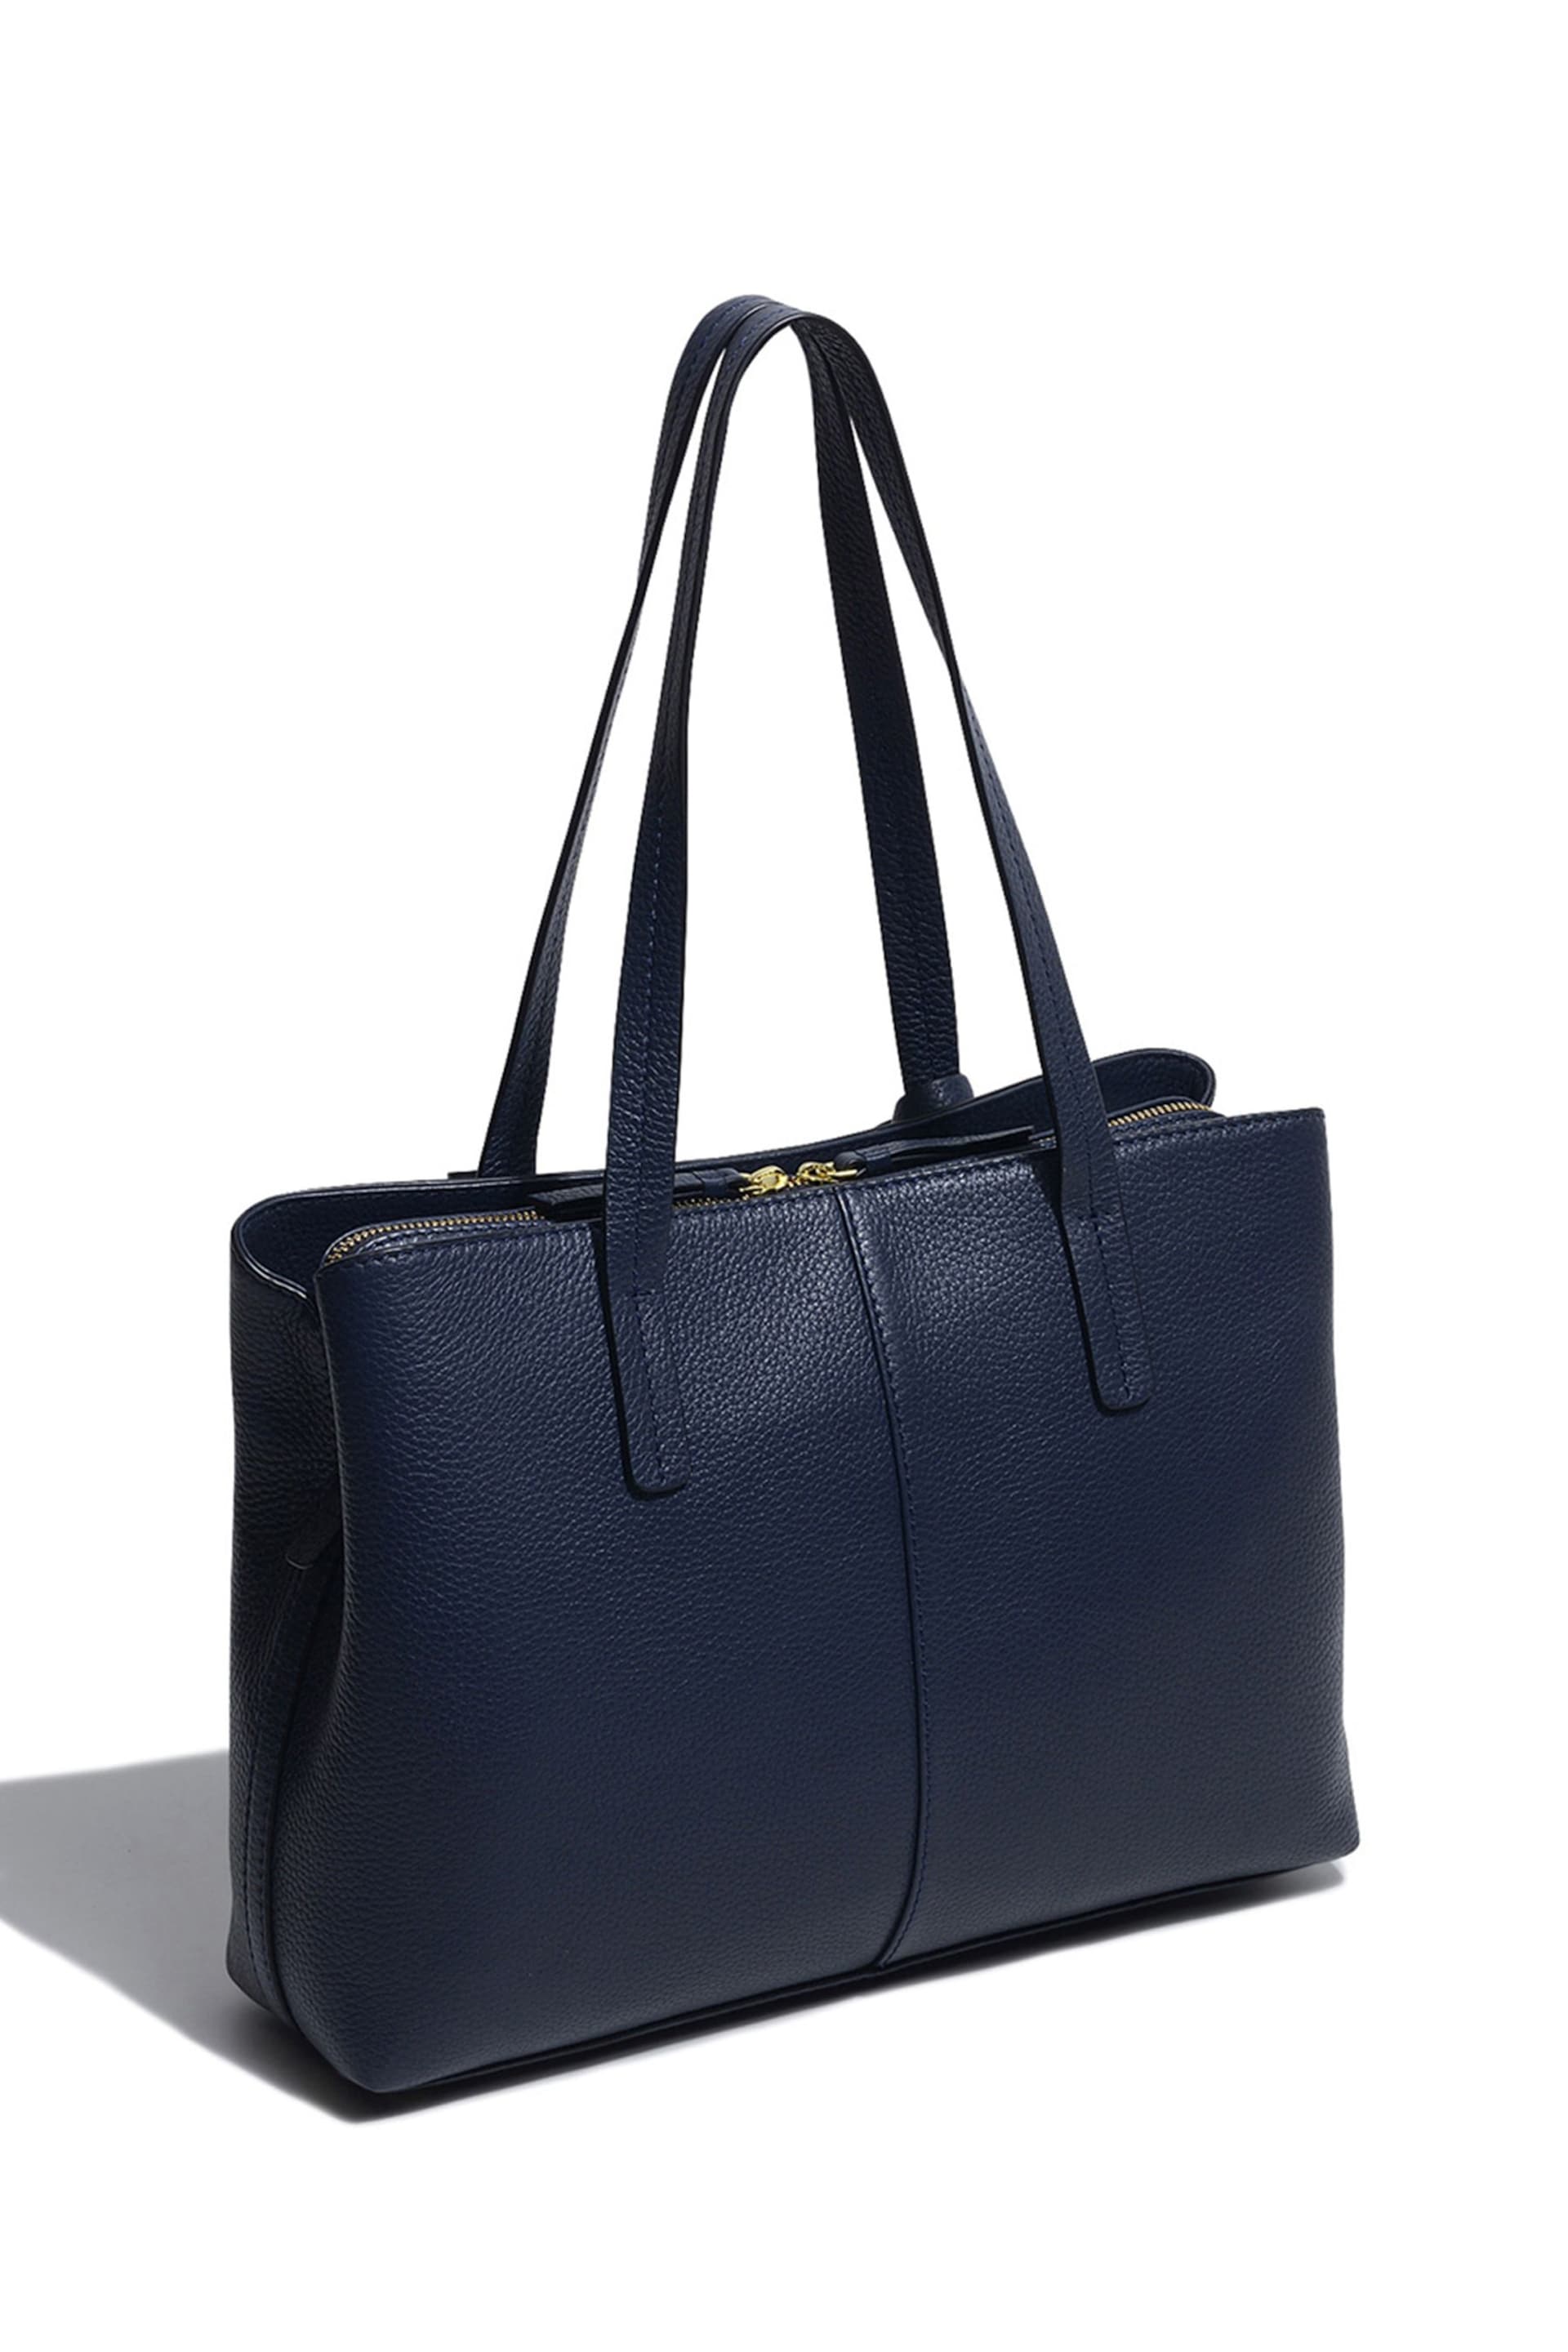 Radley London Dukes Place Large Open Top Workbag - Image 2 of 4